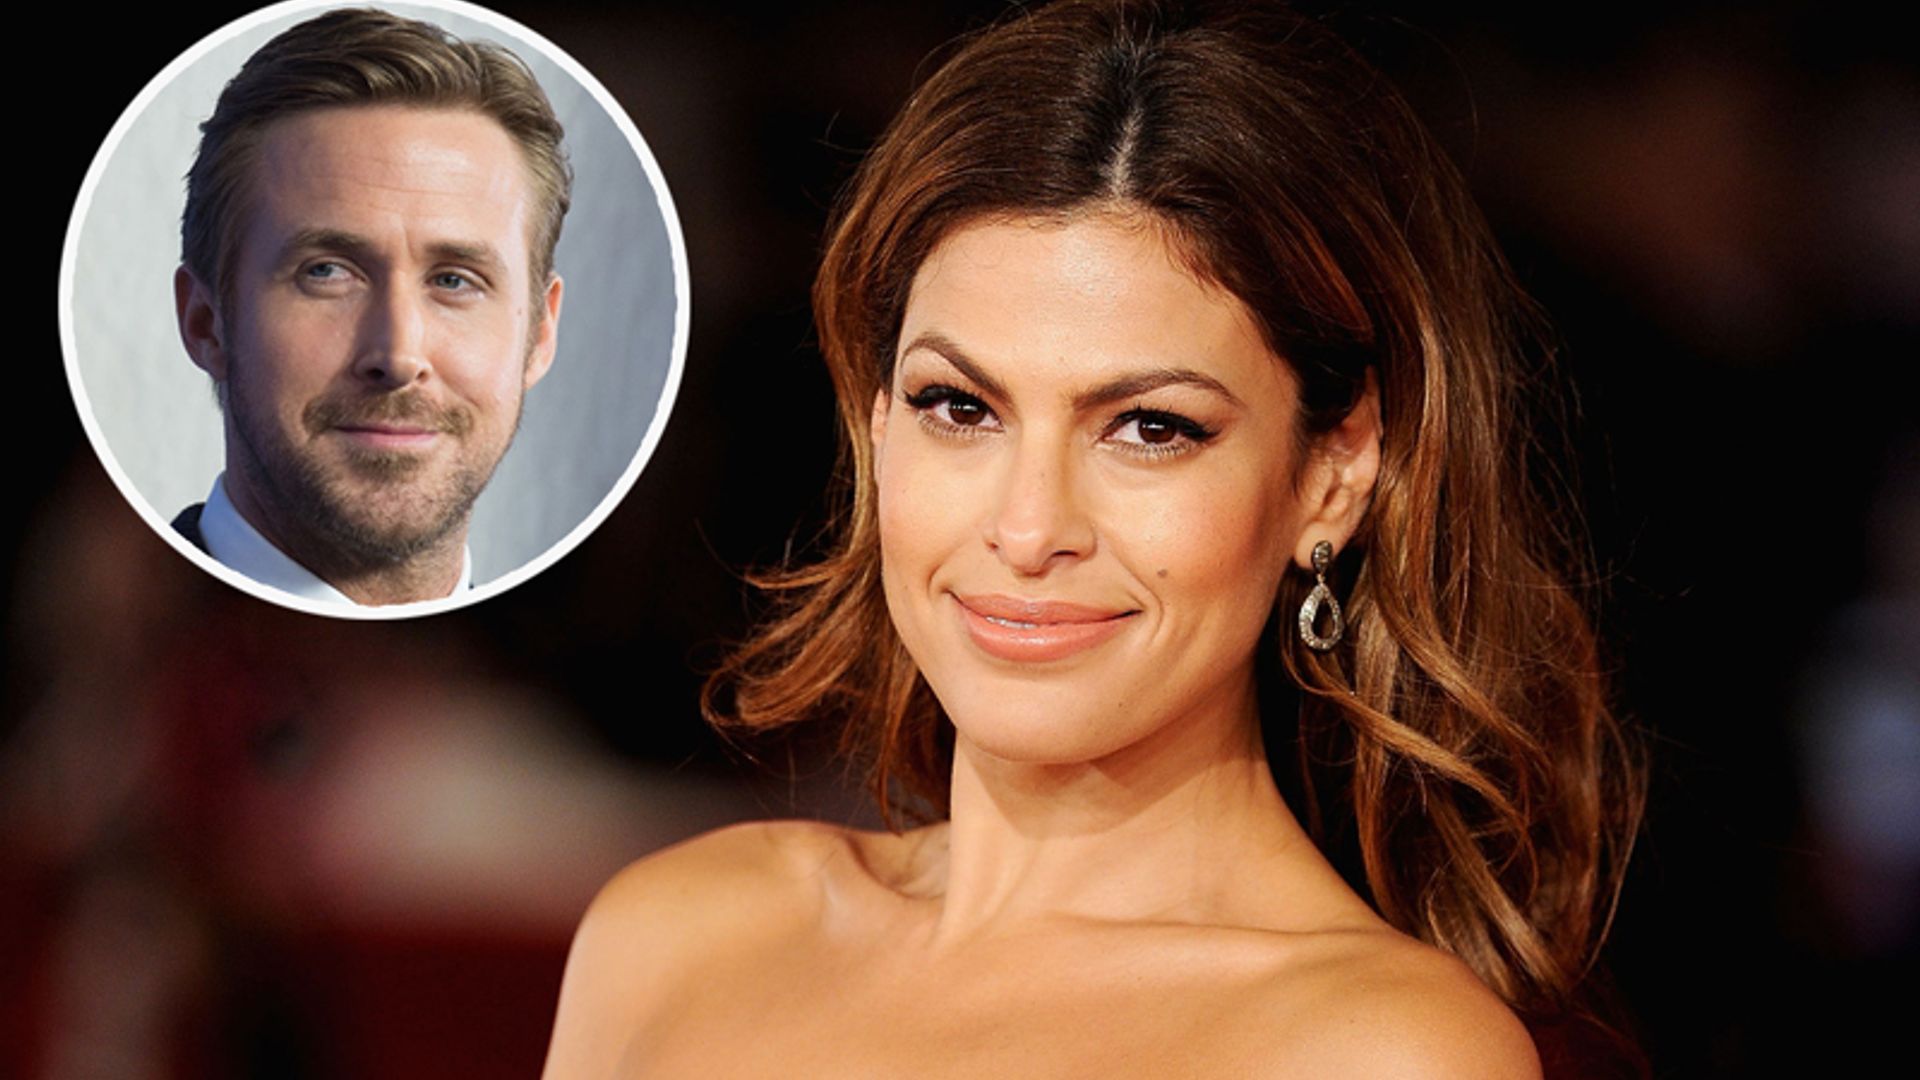 Eva Mendes on why she wasn't with Ryan Gosling during awards season and their family life